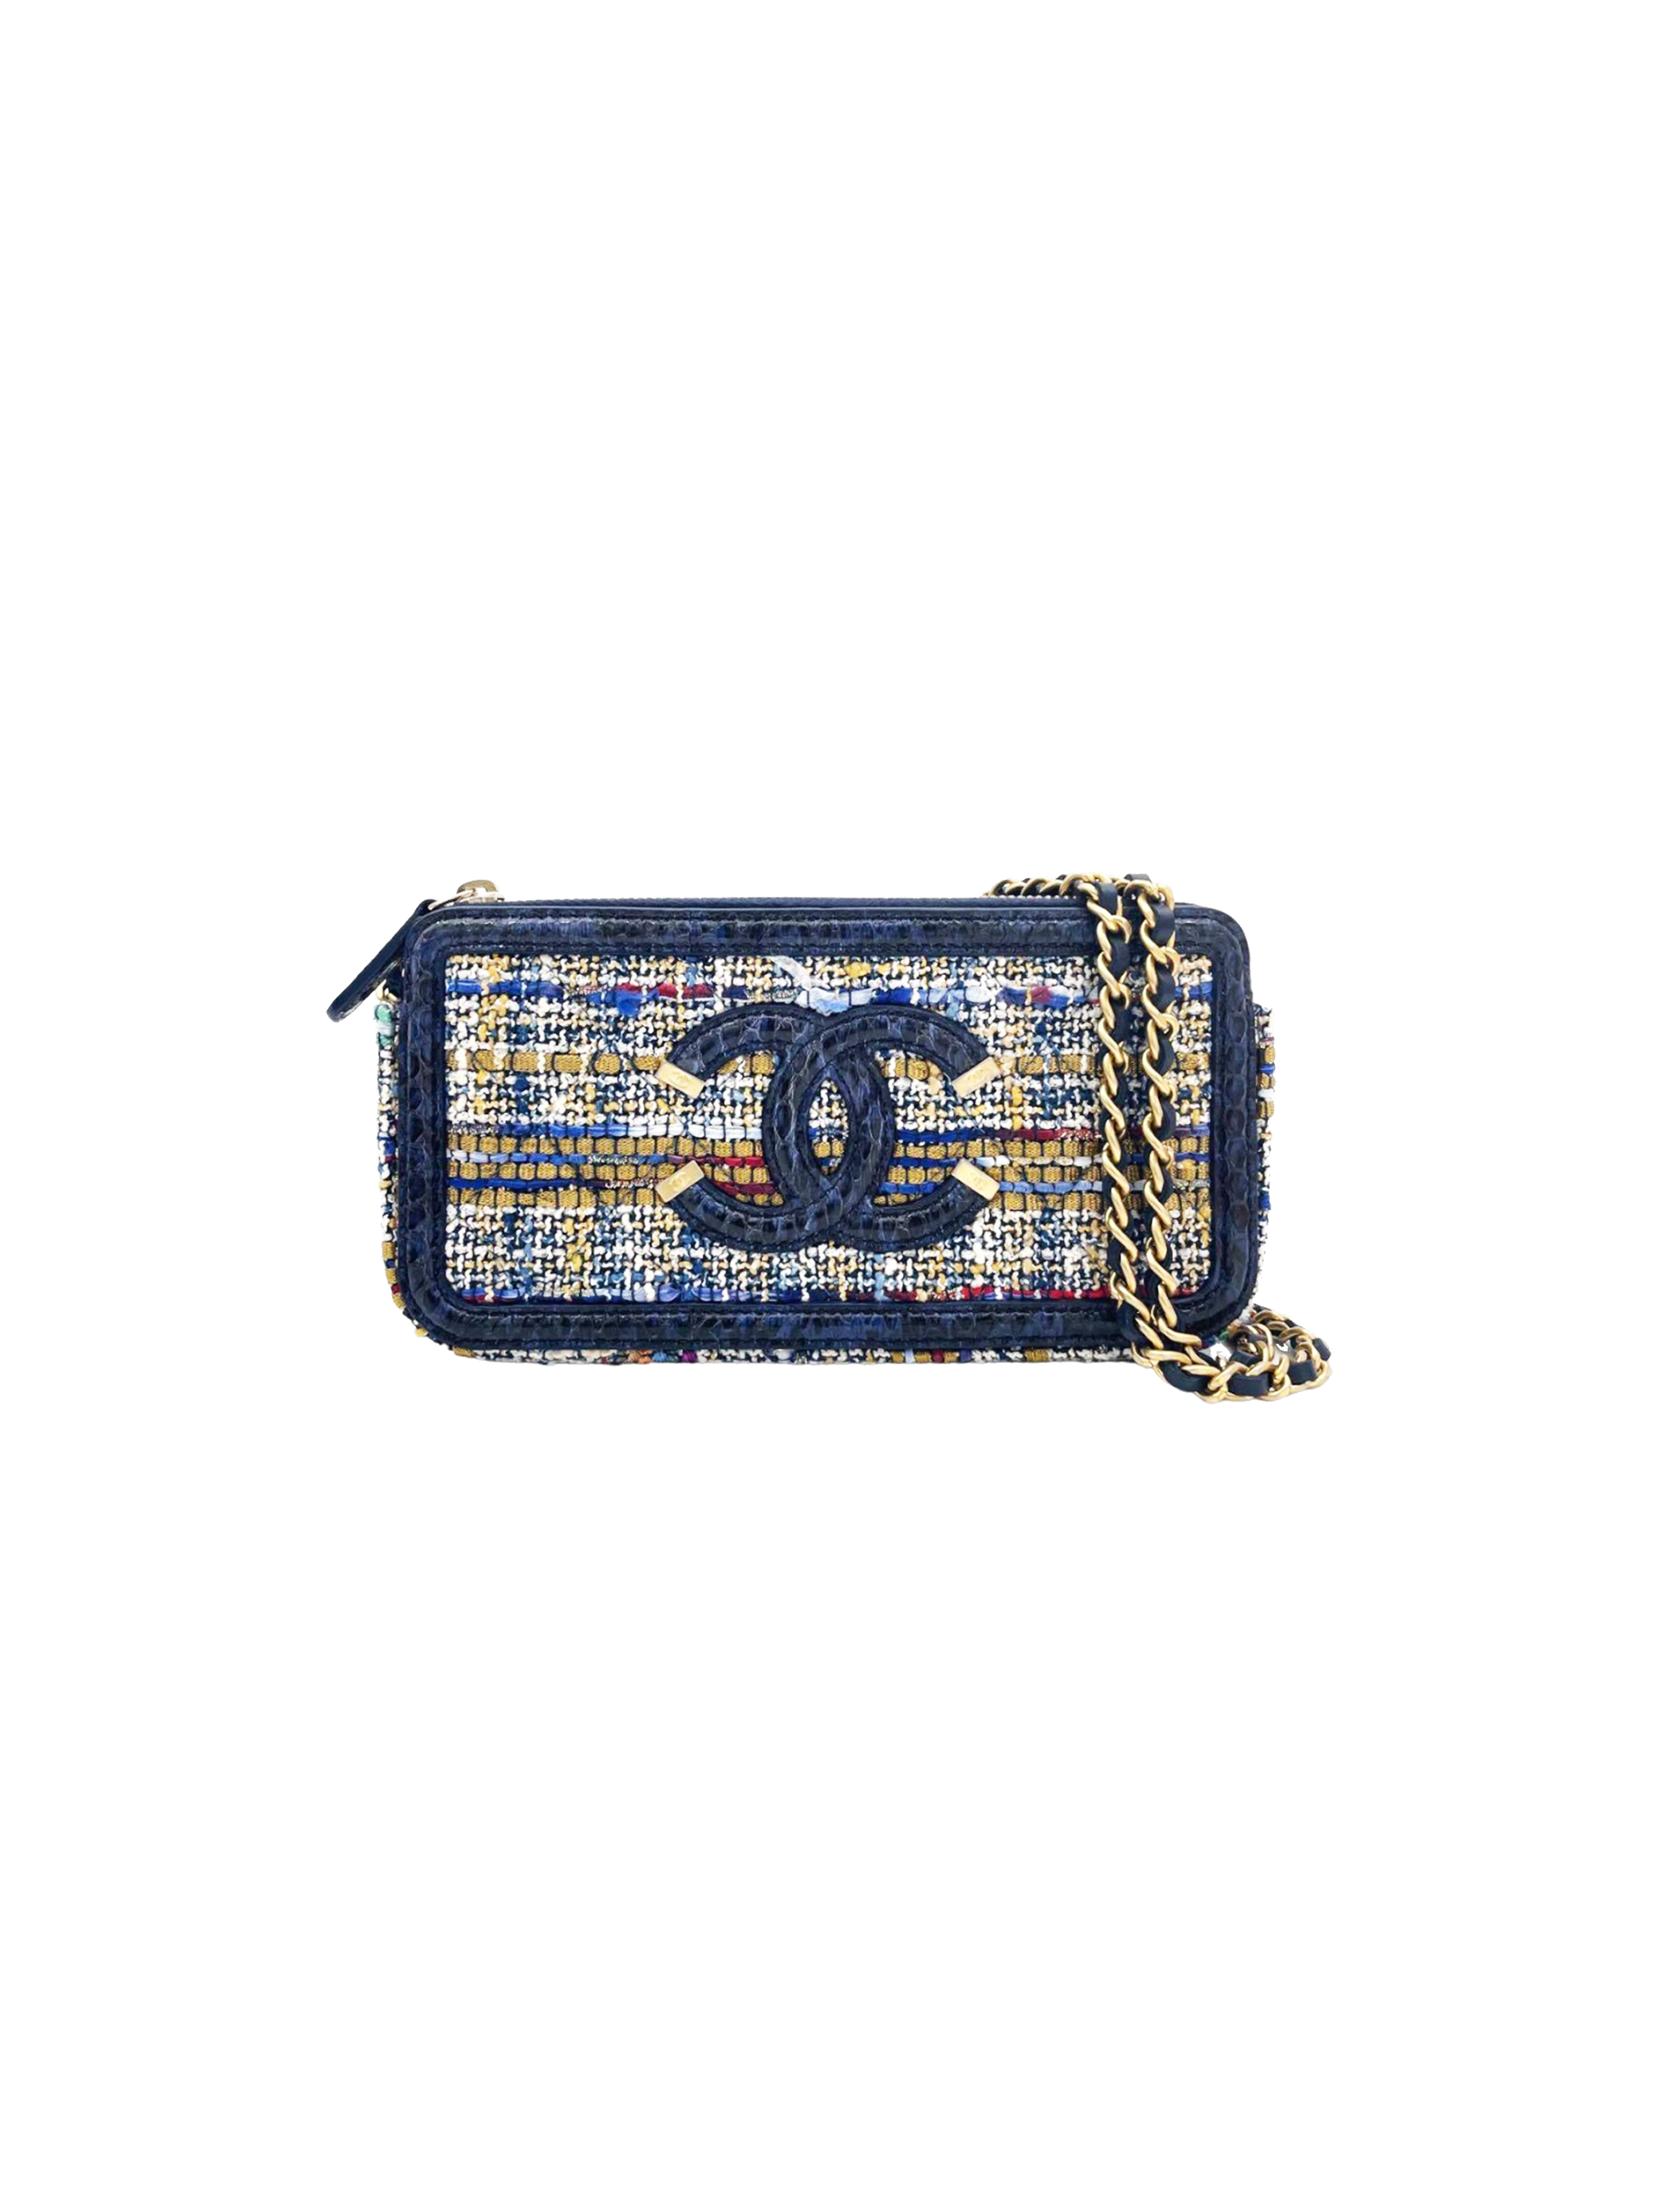 Chanel 2018 Tweed CC Filigree Clutch With Chain